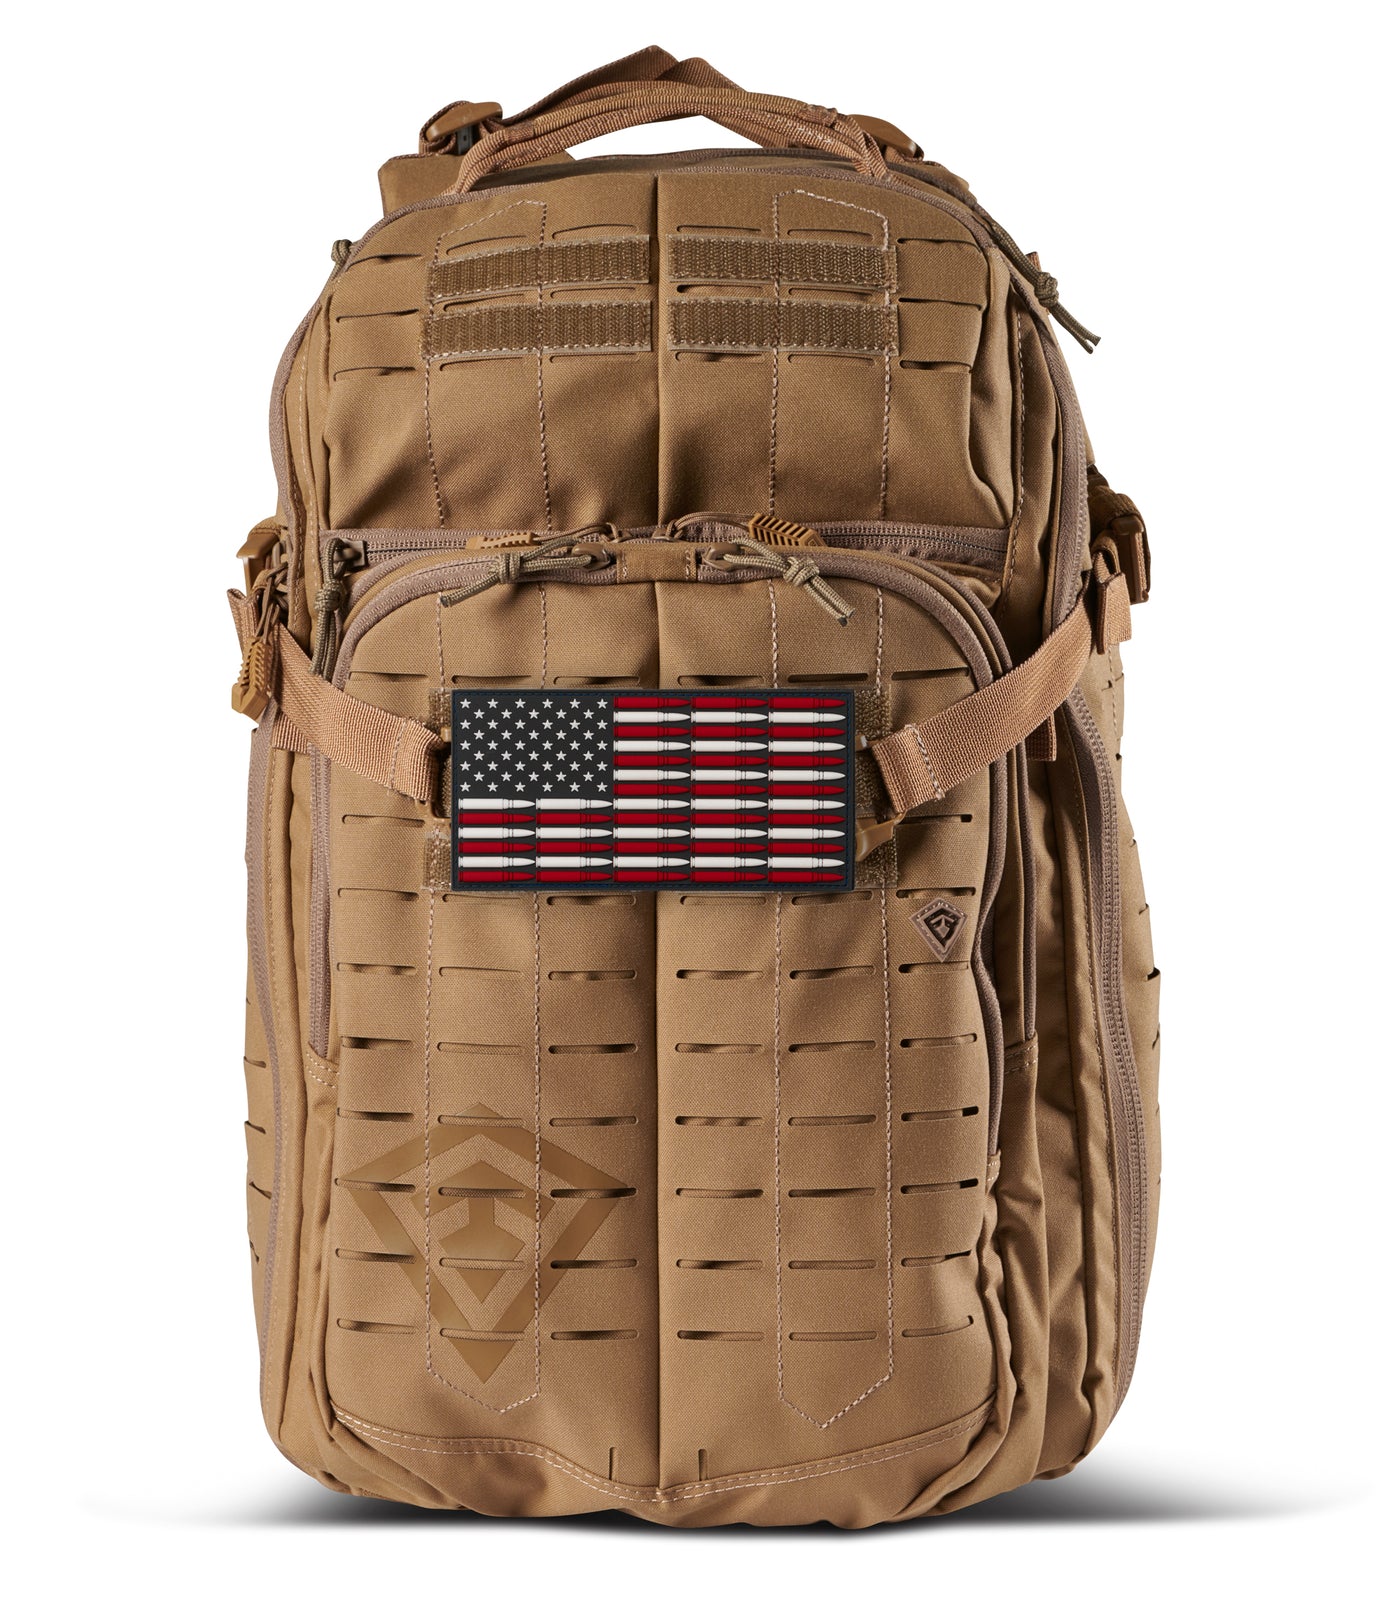 Ammo Flag Patch in Multi on Bag